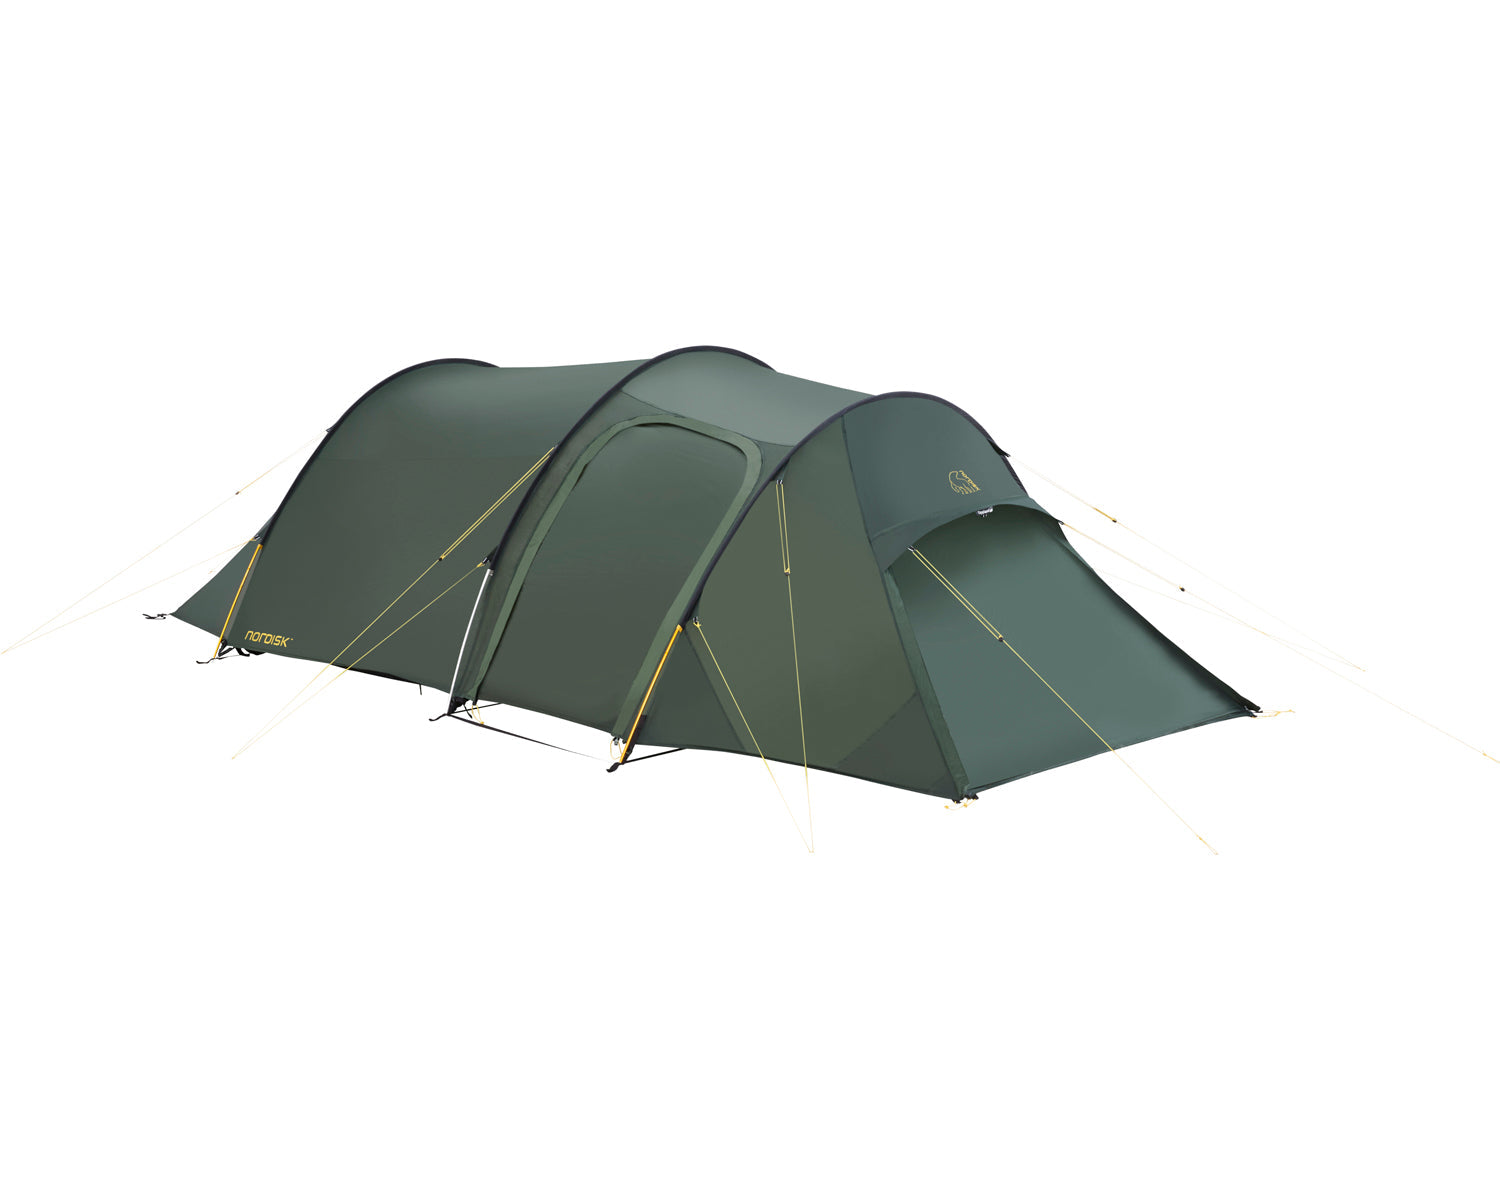 Oppland 3 SI tent - 3 person - Forest Green